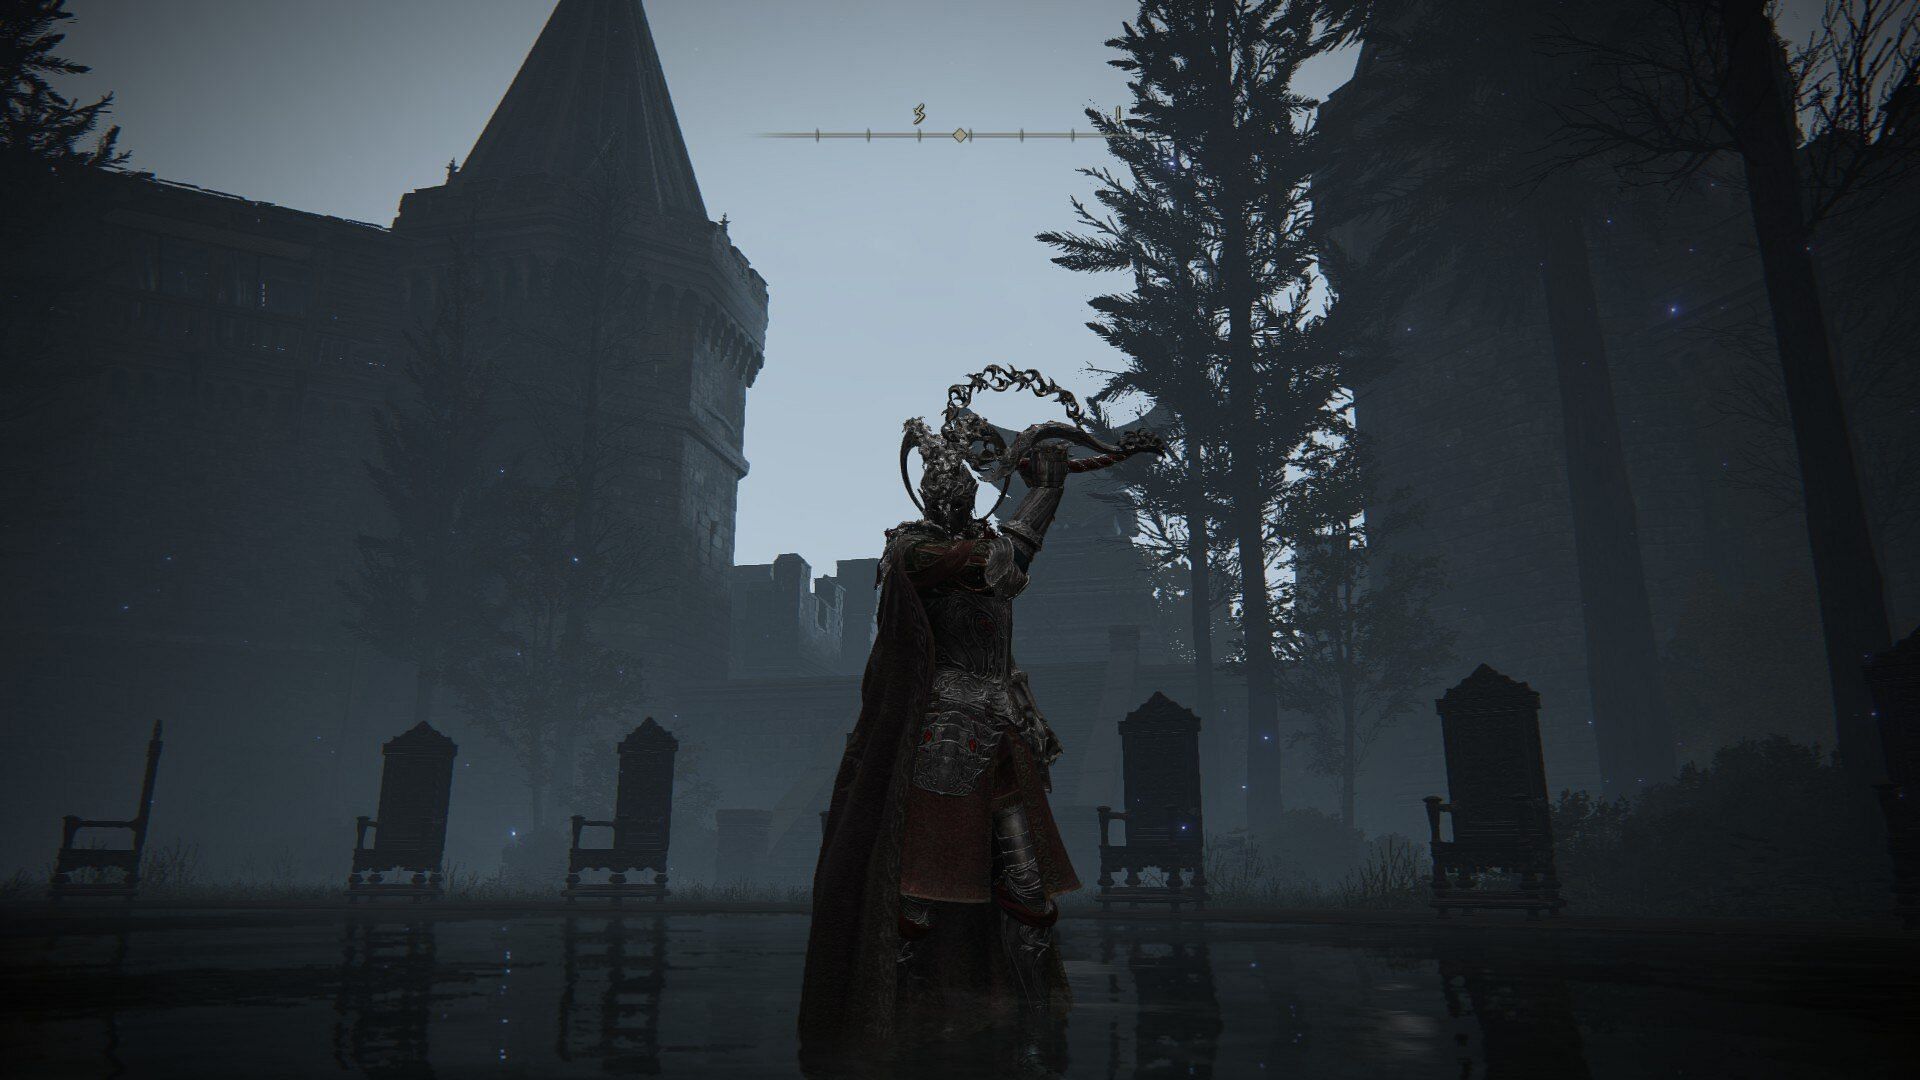 &quot;The tale of House Hoslow is told in blood&quot; - Diallos Hoslow (image via FromSoftware)